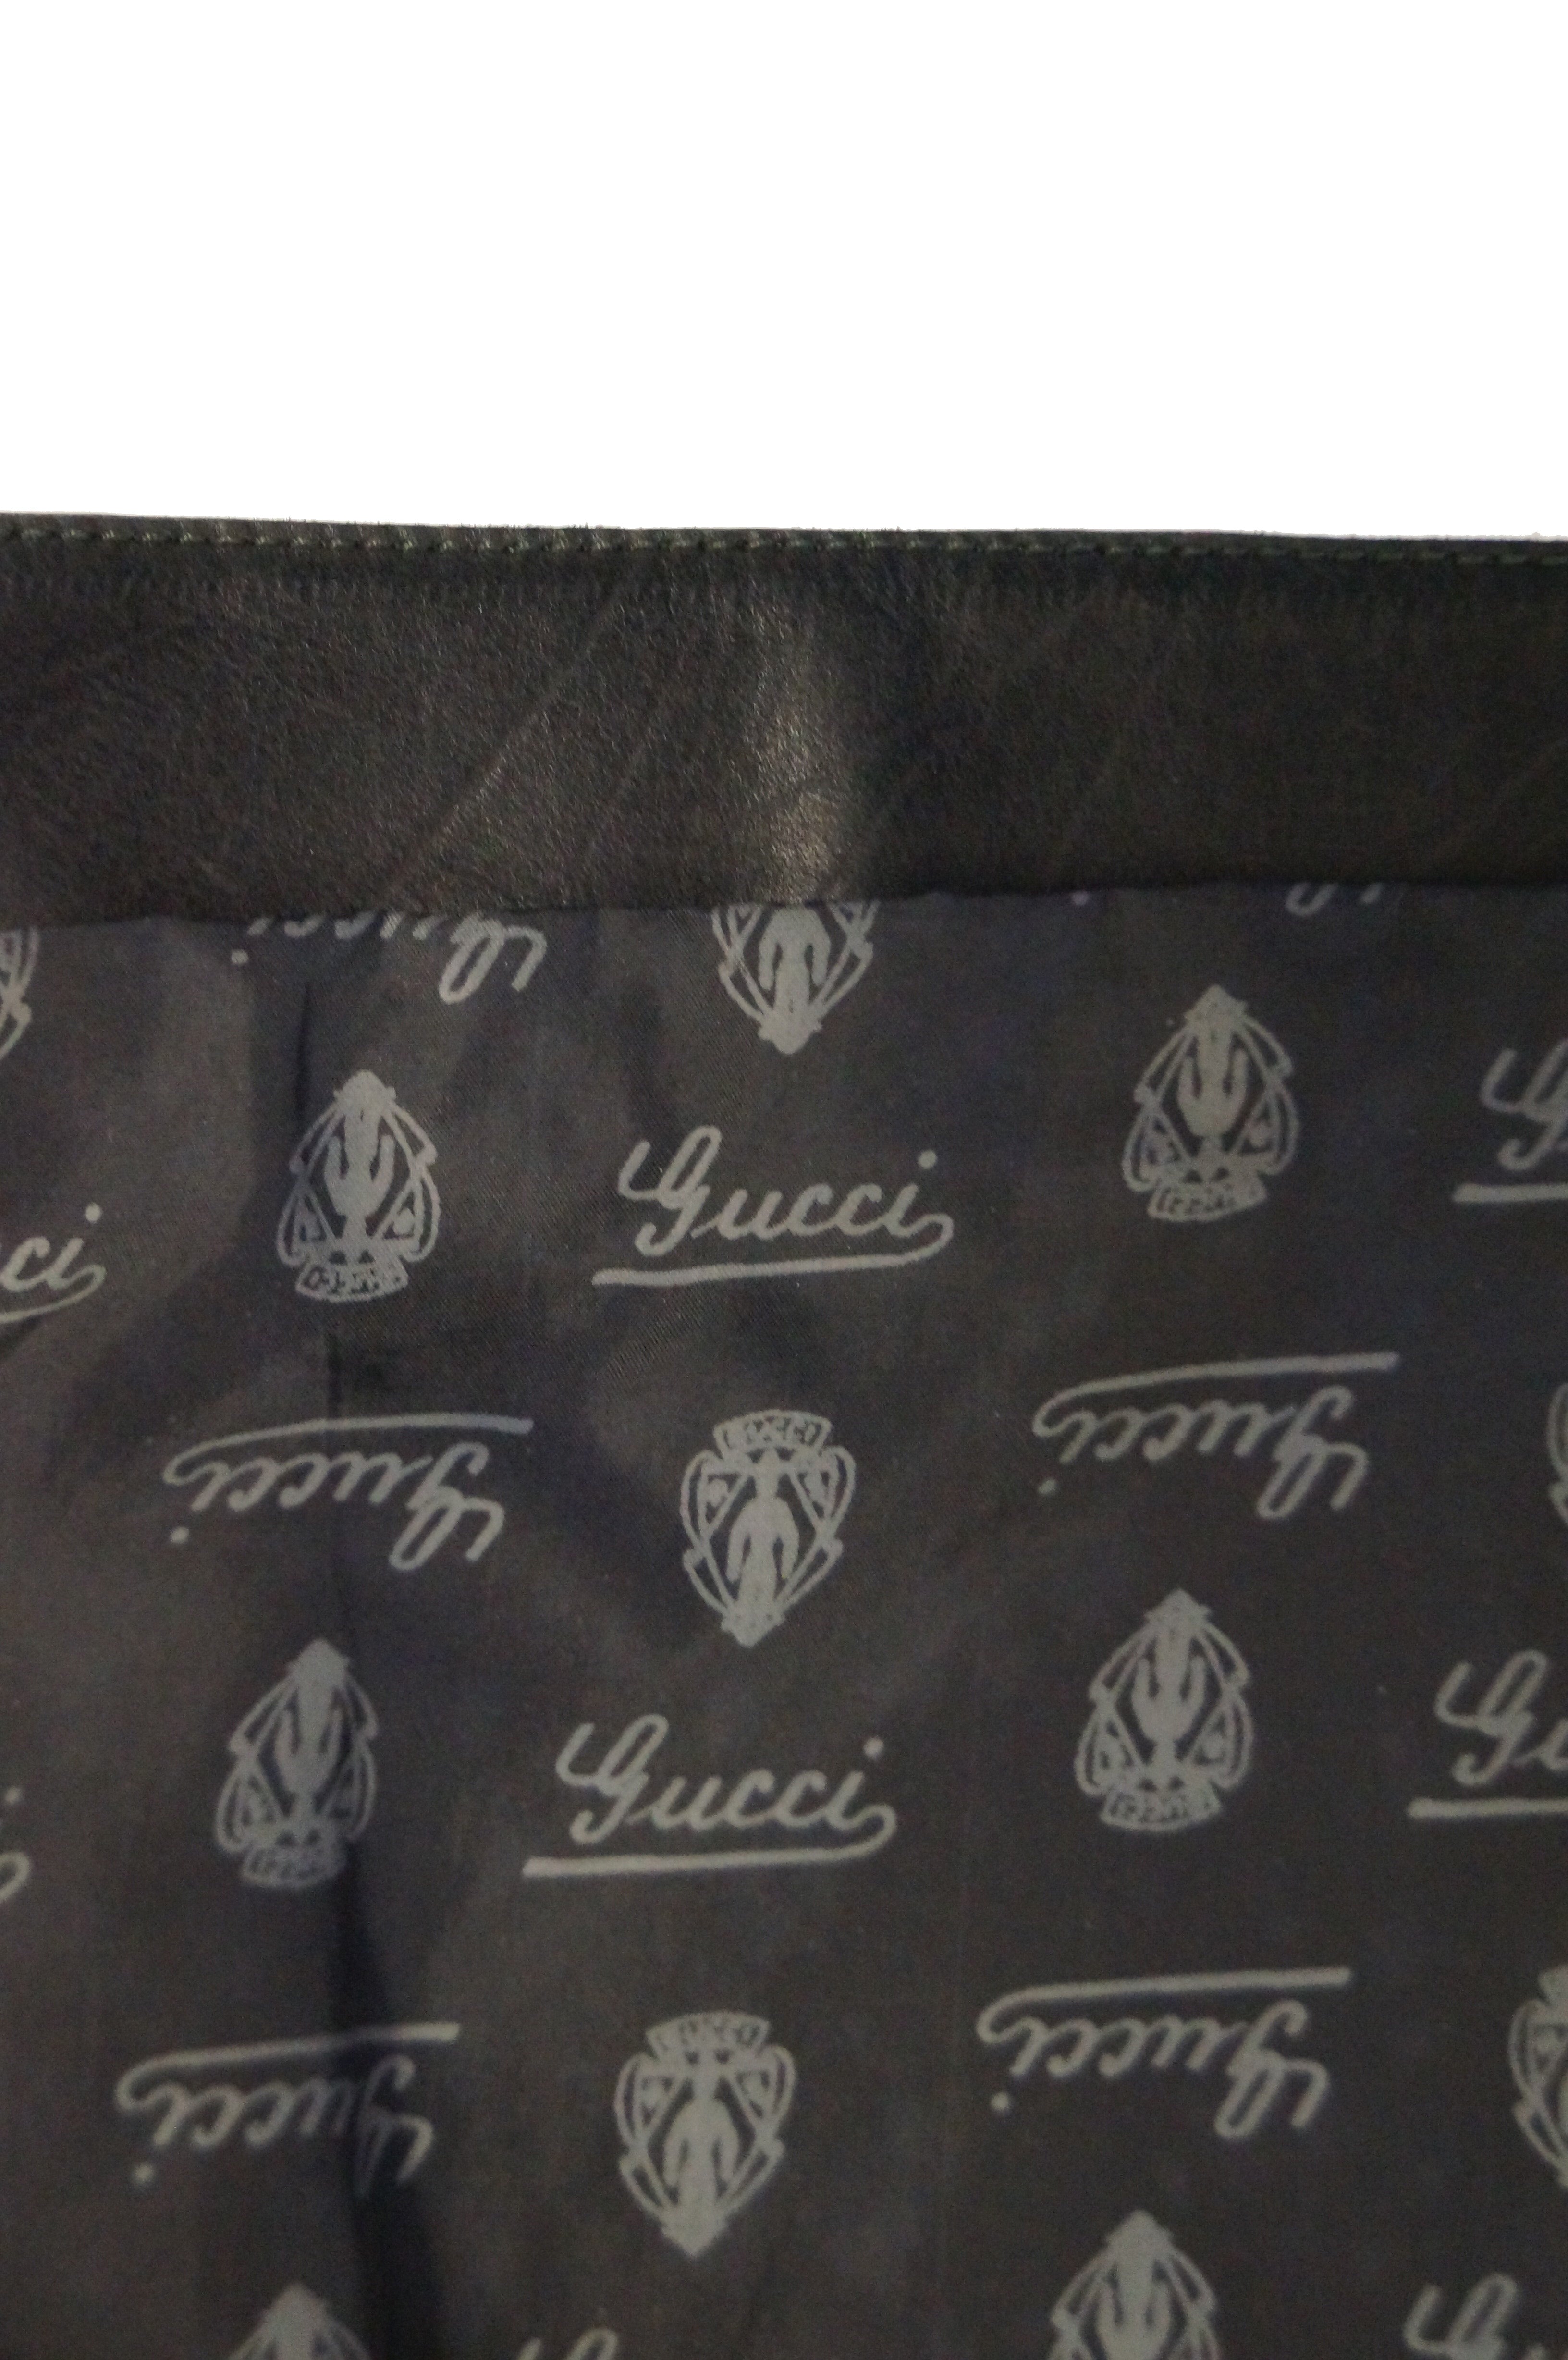 Gucci embossed bag  Sterling & Knight Jewelry & Pawn